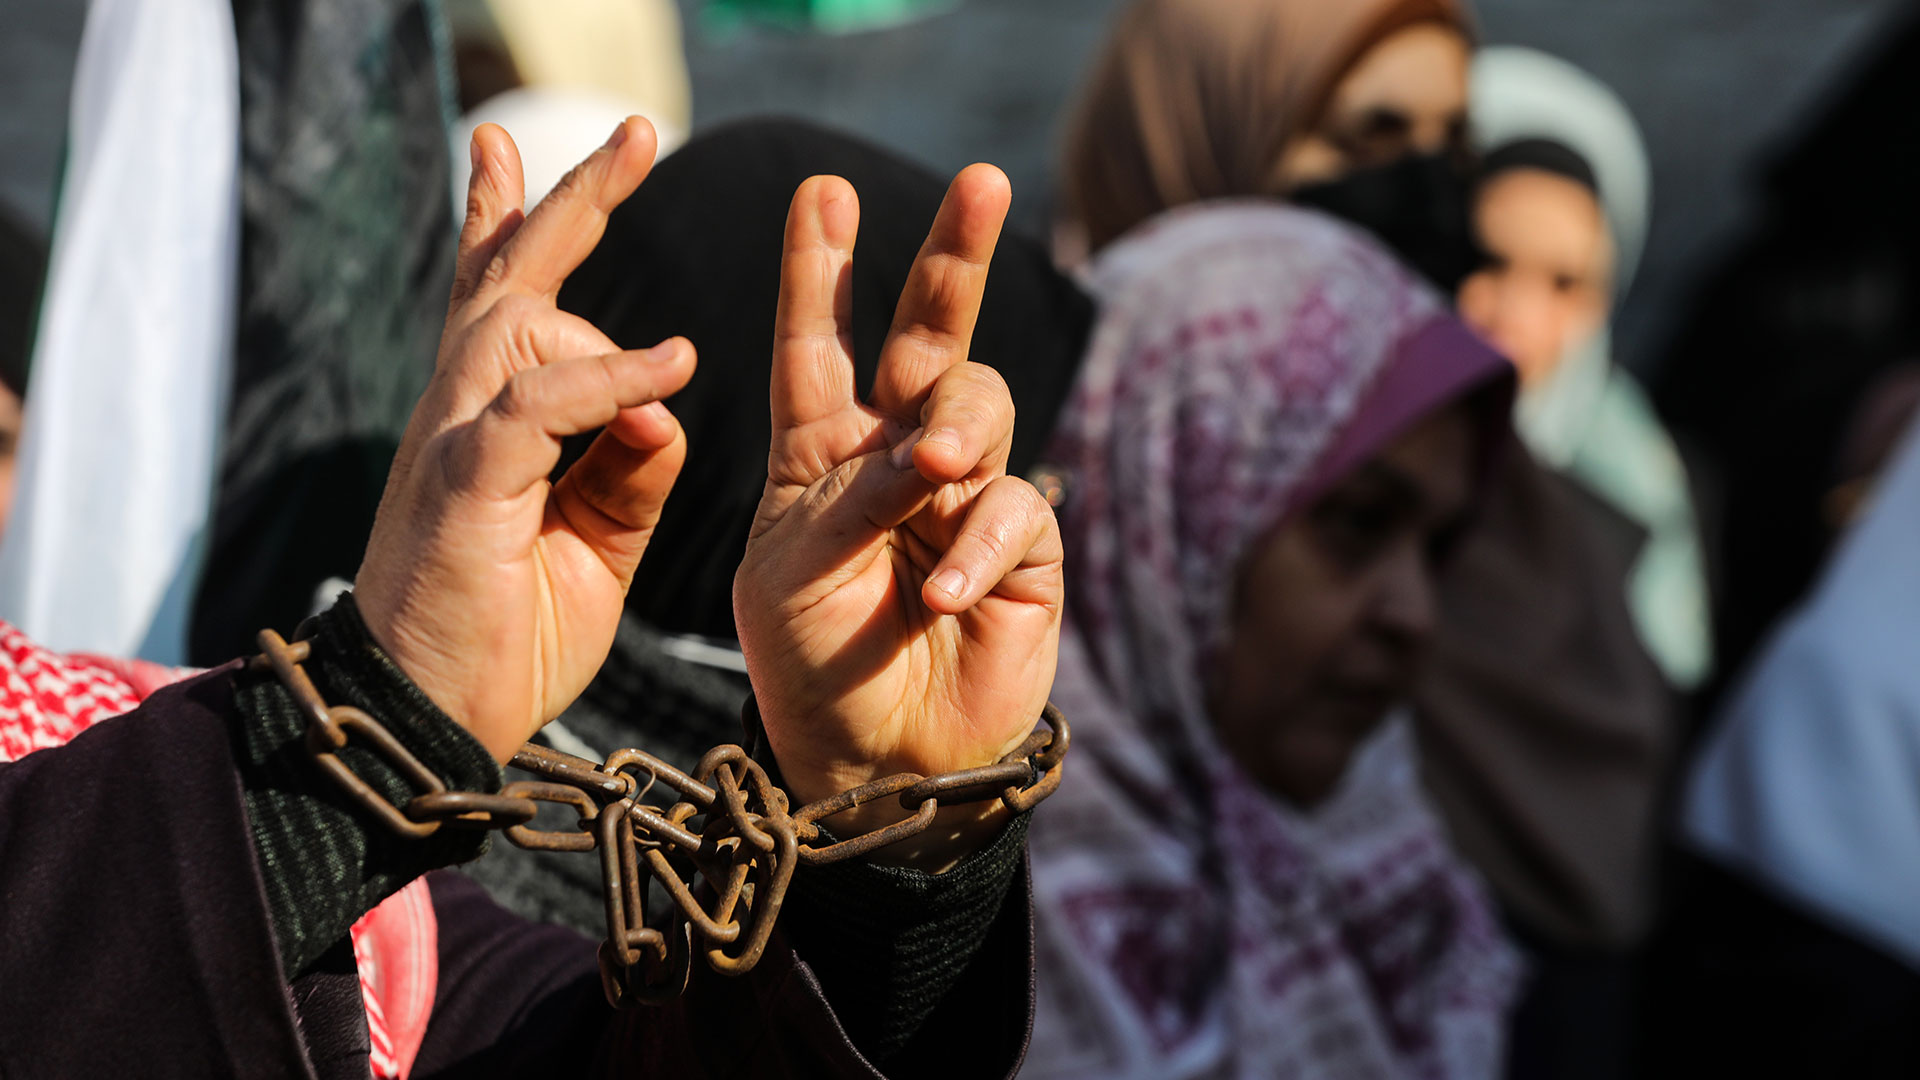 PPC: 29 Palestinian Female Detainees Are Still in Israeli Prisons